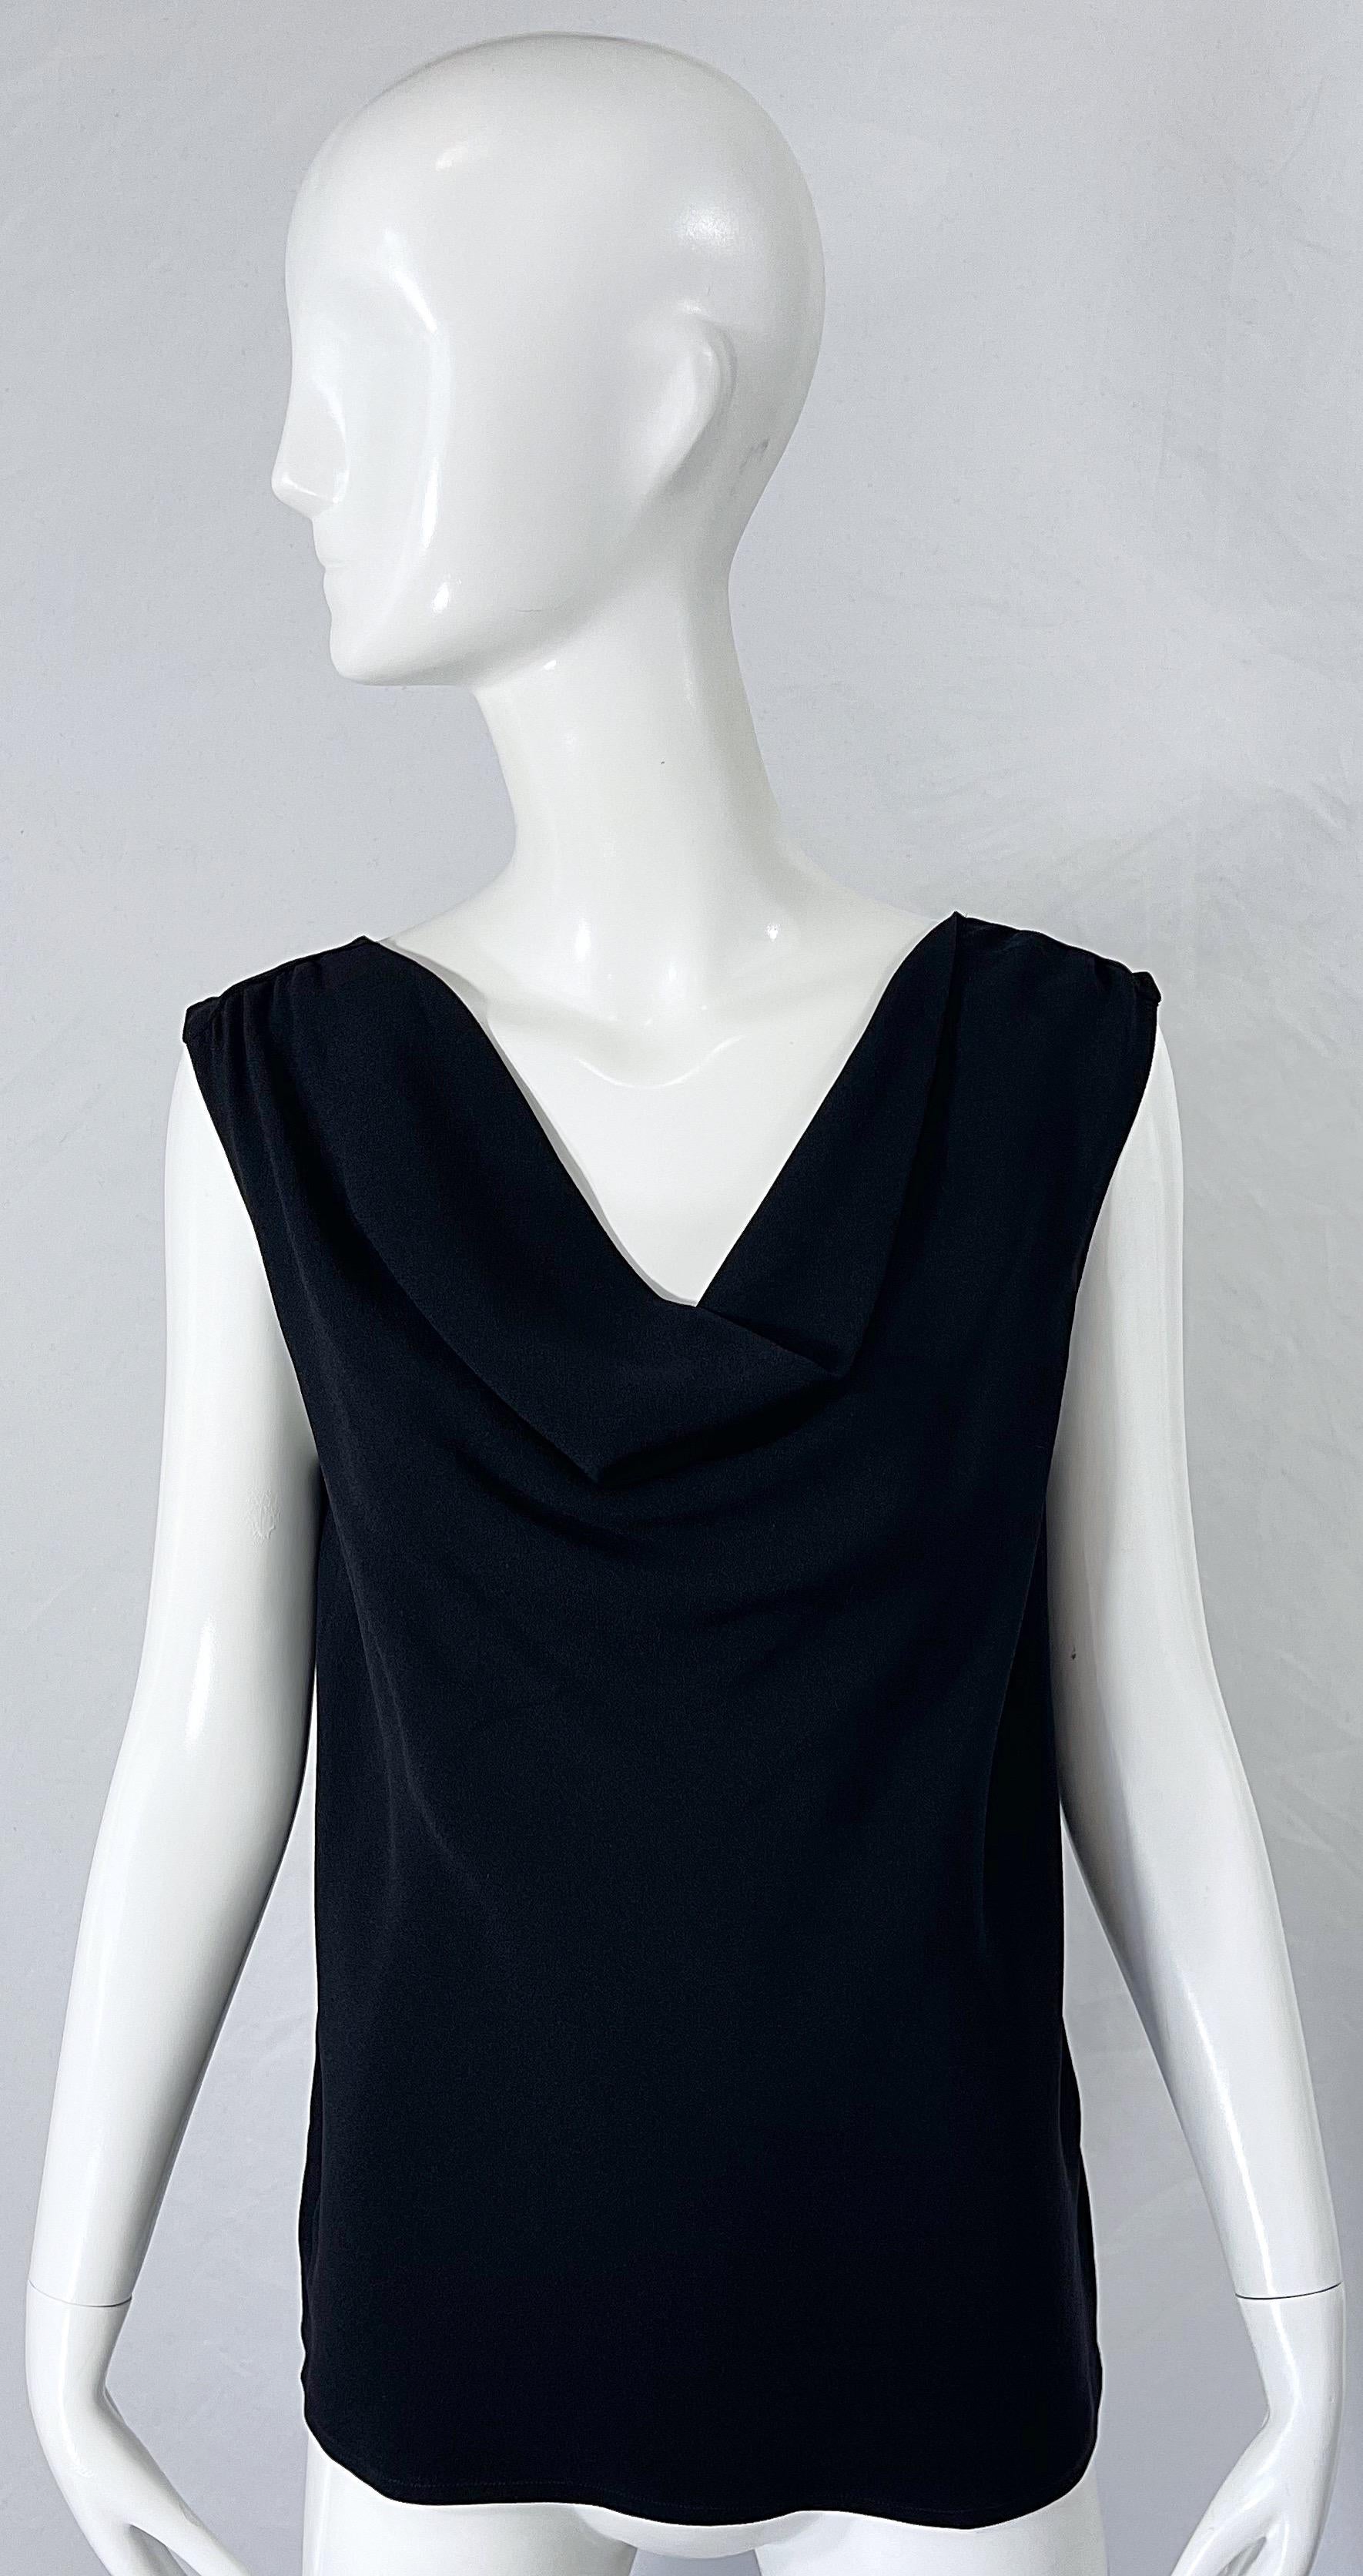 Chic early 90s YVES SAINT LAURENT YSL Rive Gauche black rayon draped sleeveless top ! The perfect black shirt to dress up or down. Great with jeans, shorts, or a skirt. Simply slips on.
In great condition 
Made in France
Approximately Size